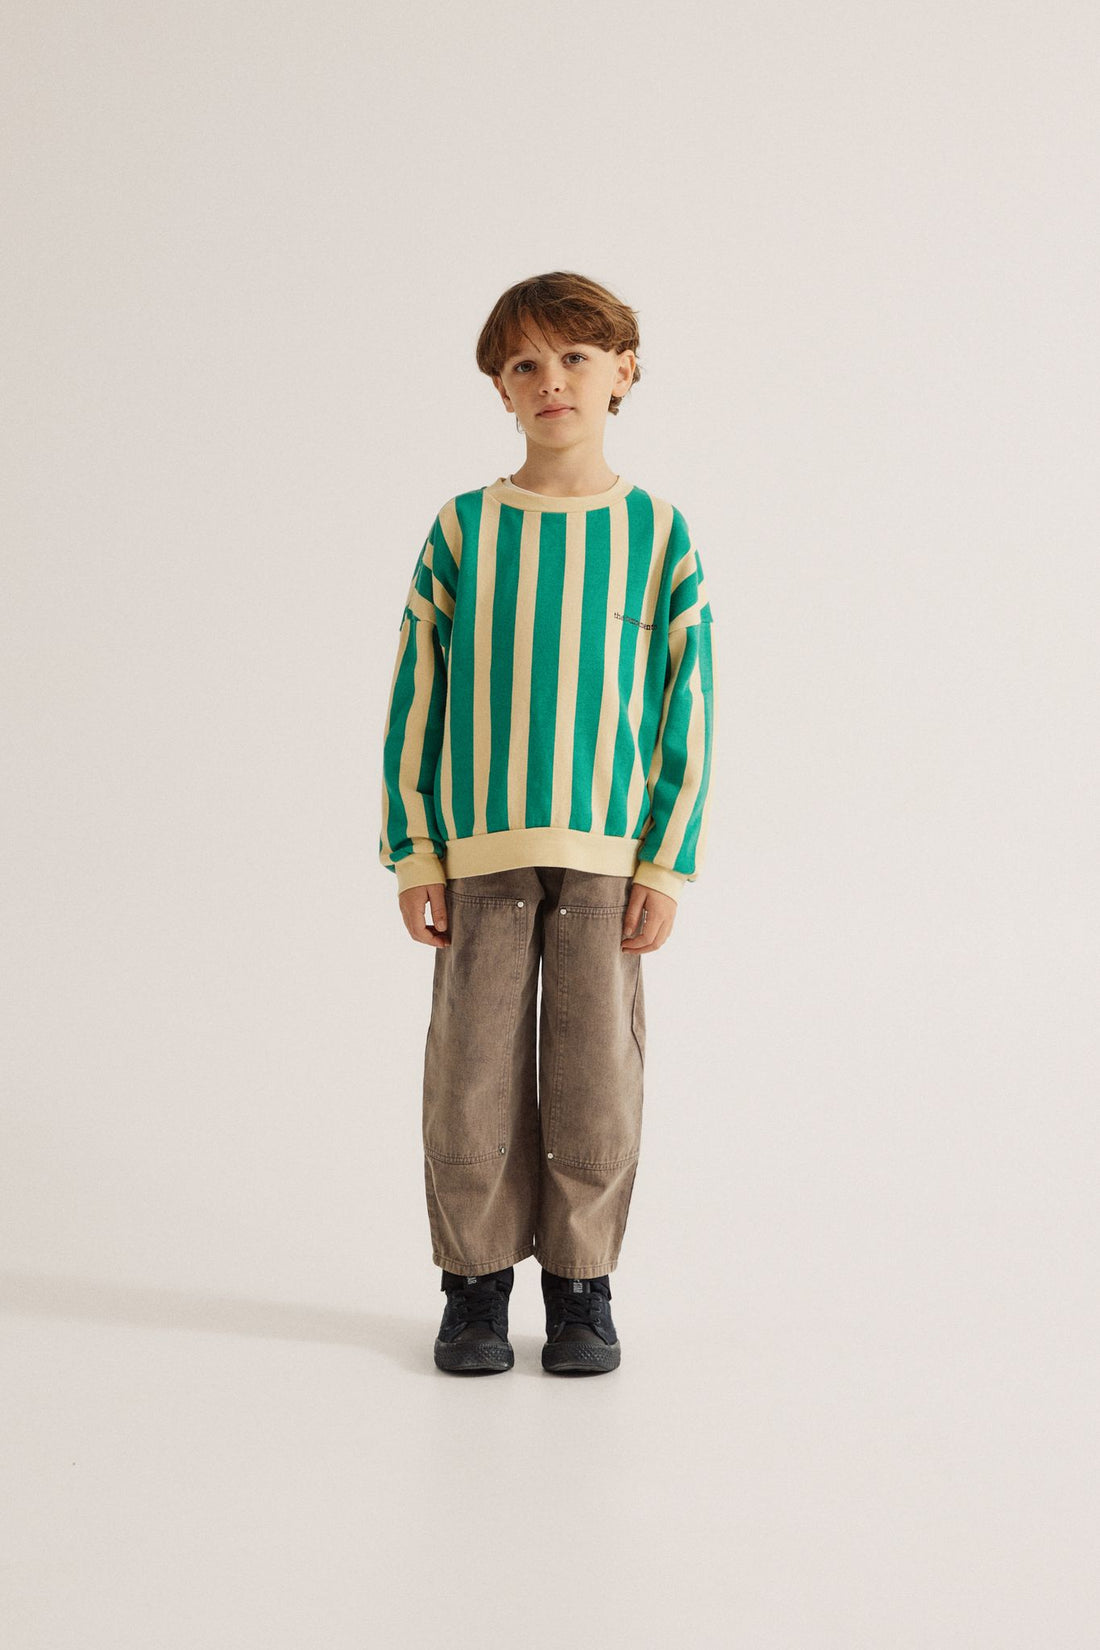 The Campamento - Green Stripes oversized kids sweater - Green